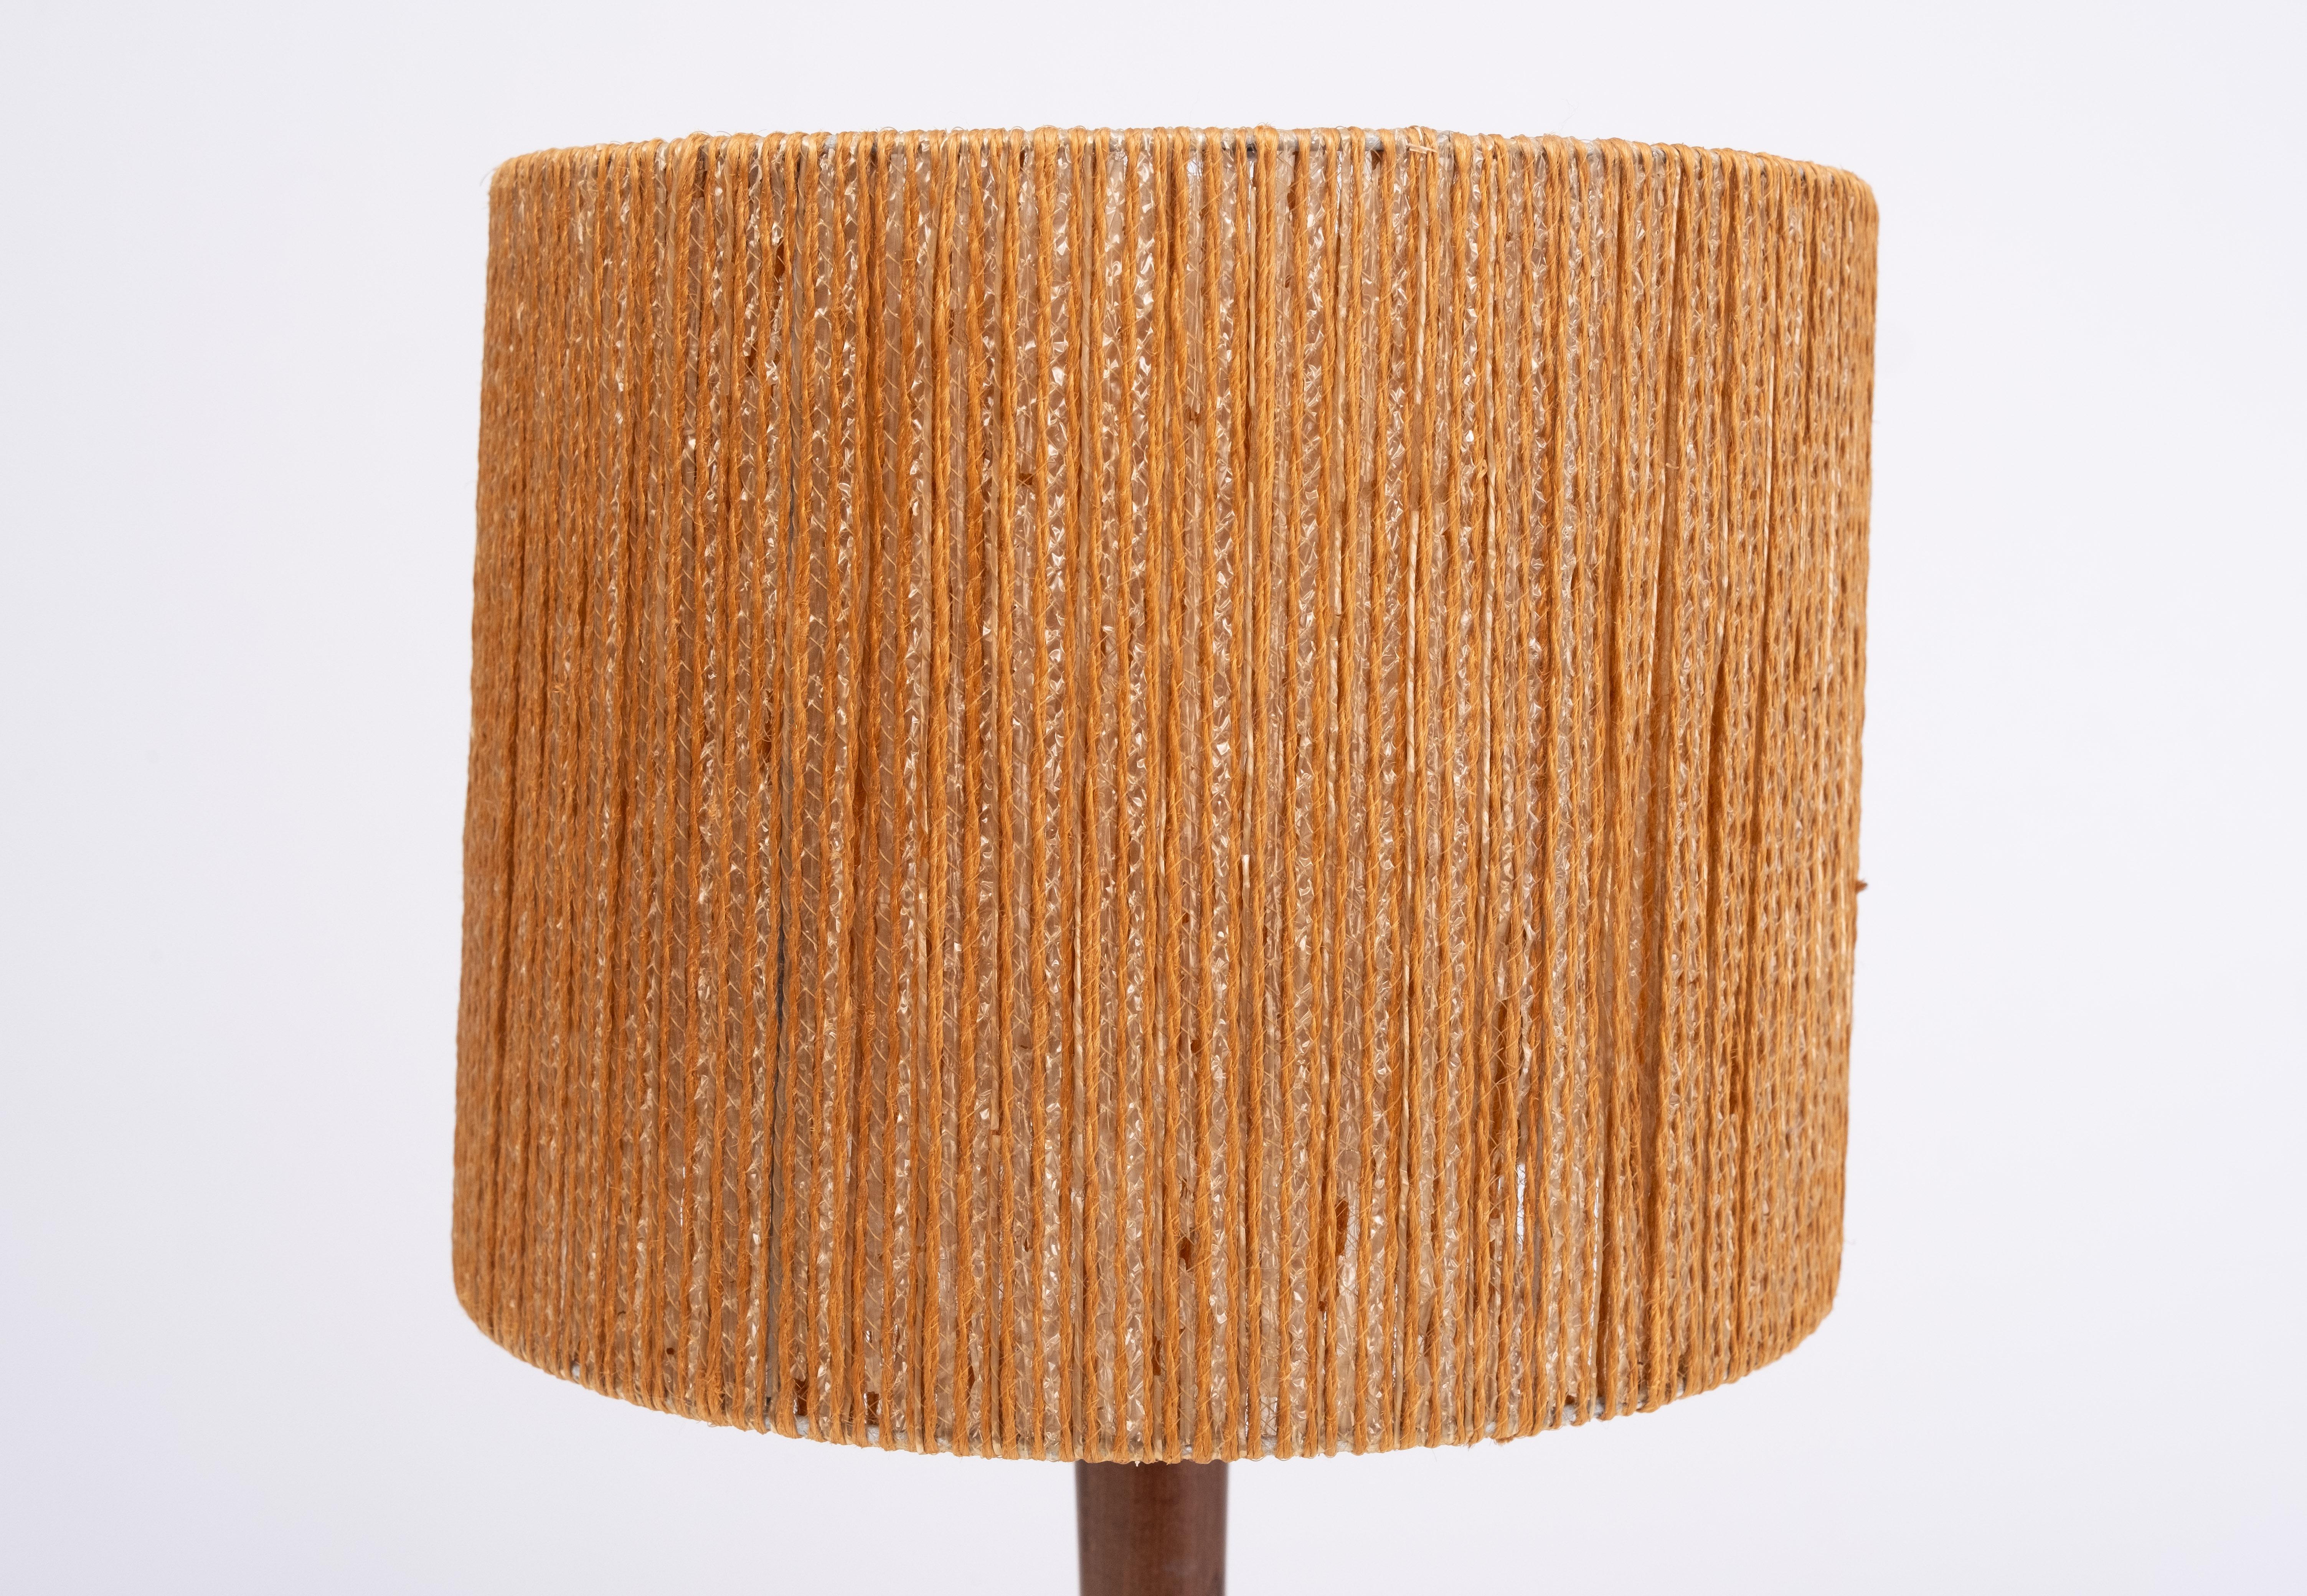 Very nice Teak Wood table lamp, comes with its original 
Rope shade . Good condition . 